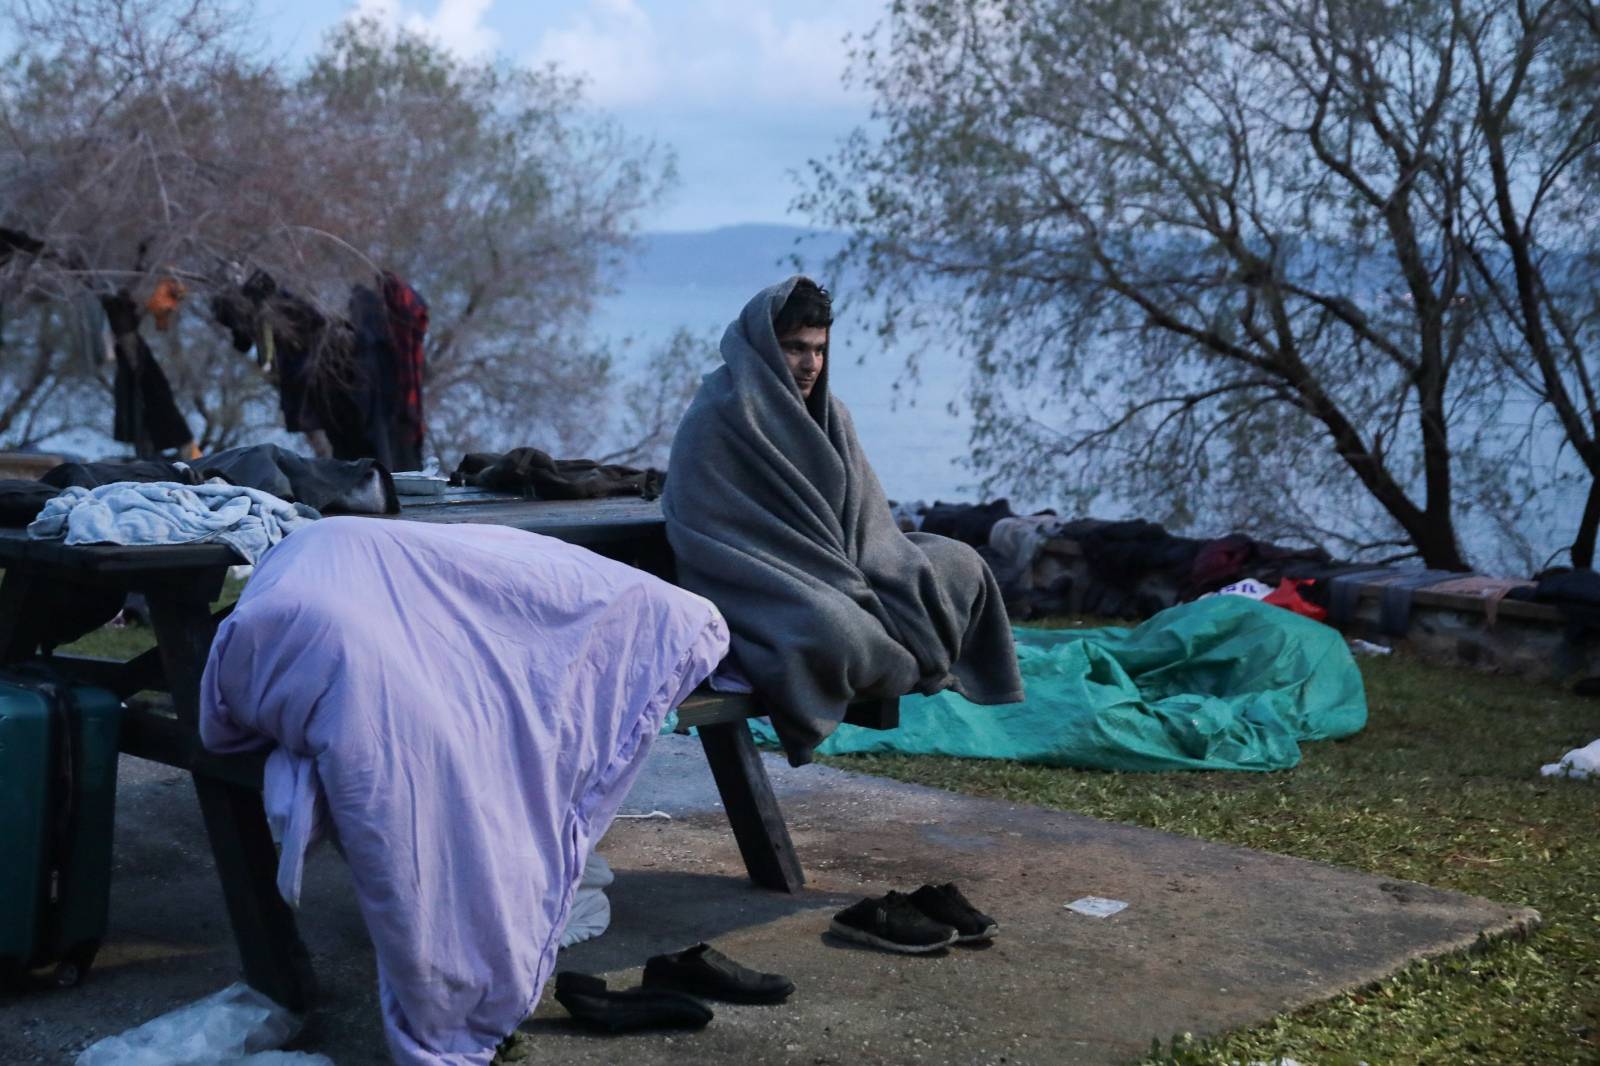 A migrant, who arrived the previous day on a dinghy after crossing part of the Aegean Sea from Turkey, sits covered with a blanket near the village of Skala Sikamias, on the island of Lesbos